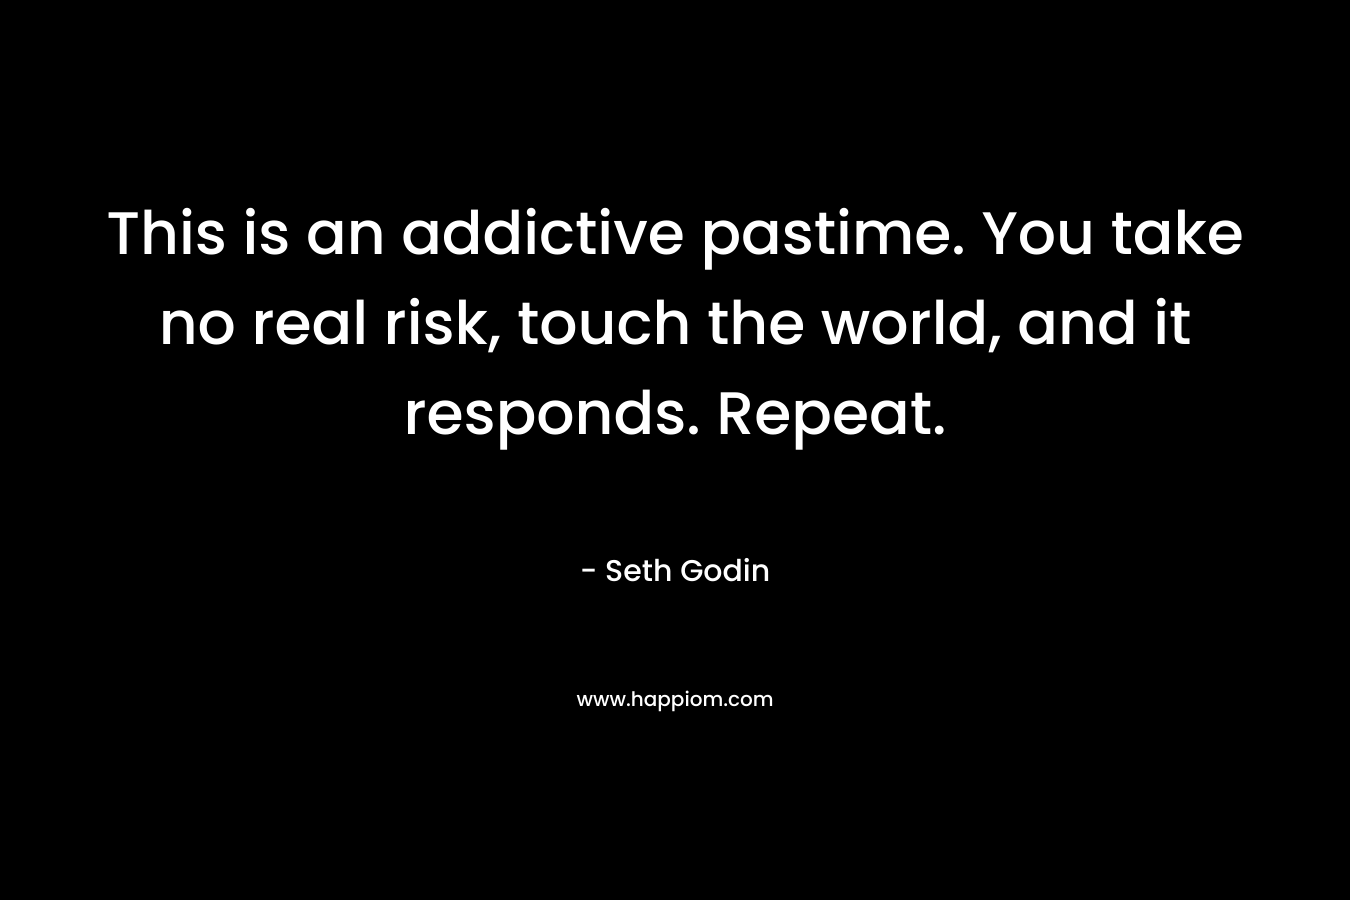 This is an addictive pastime. You take no real risk, touch the world, and it responds. Repeat. – Seth Godin